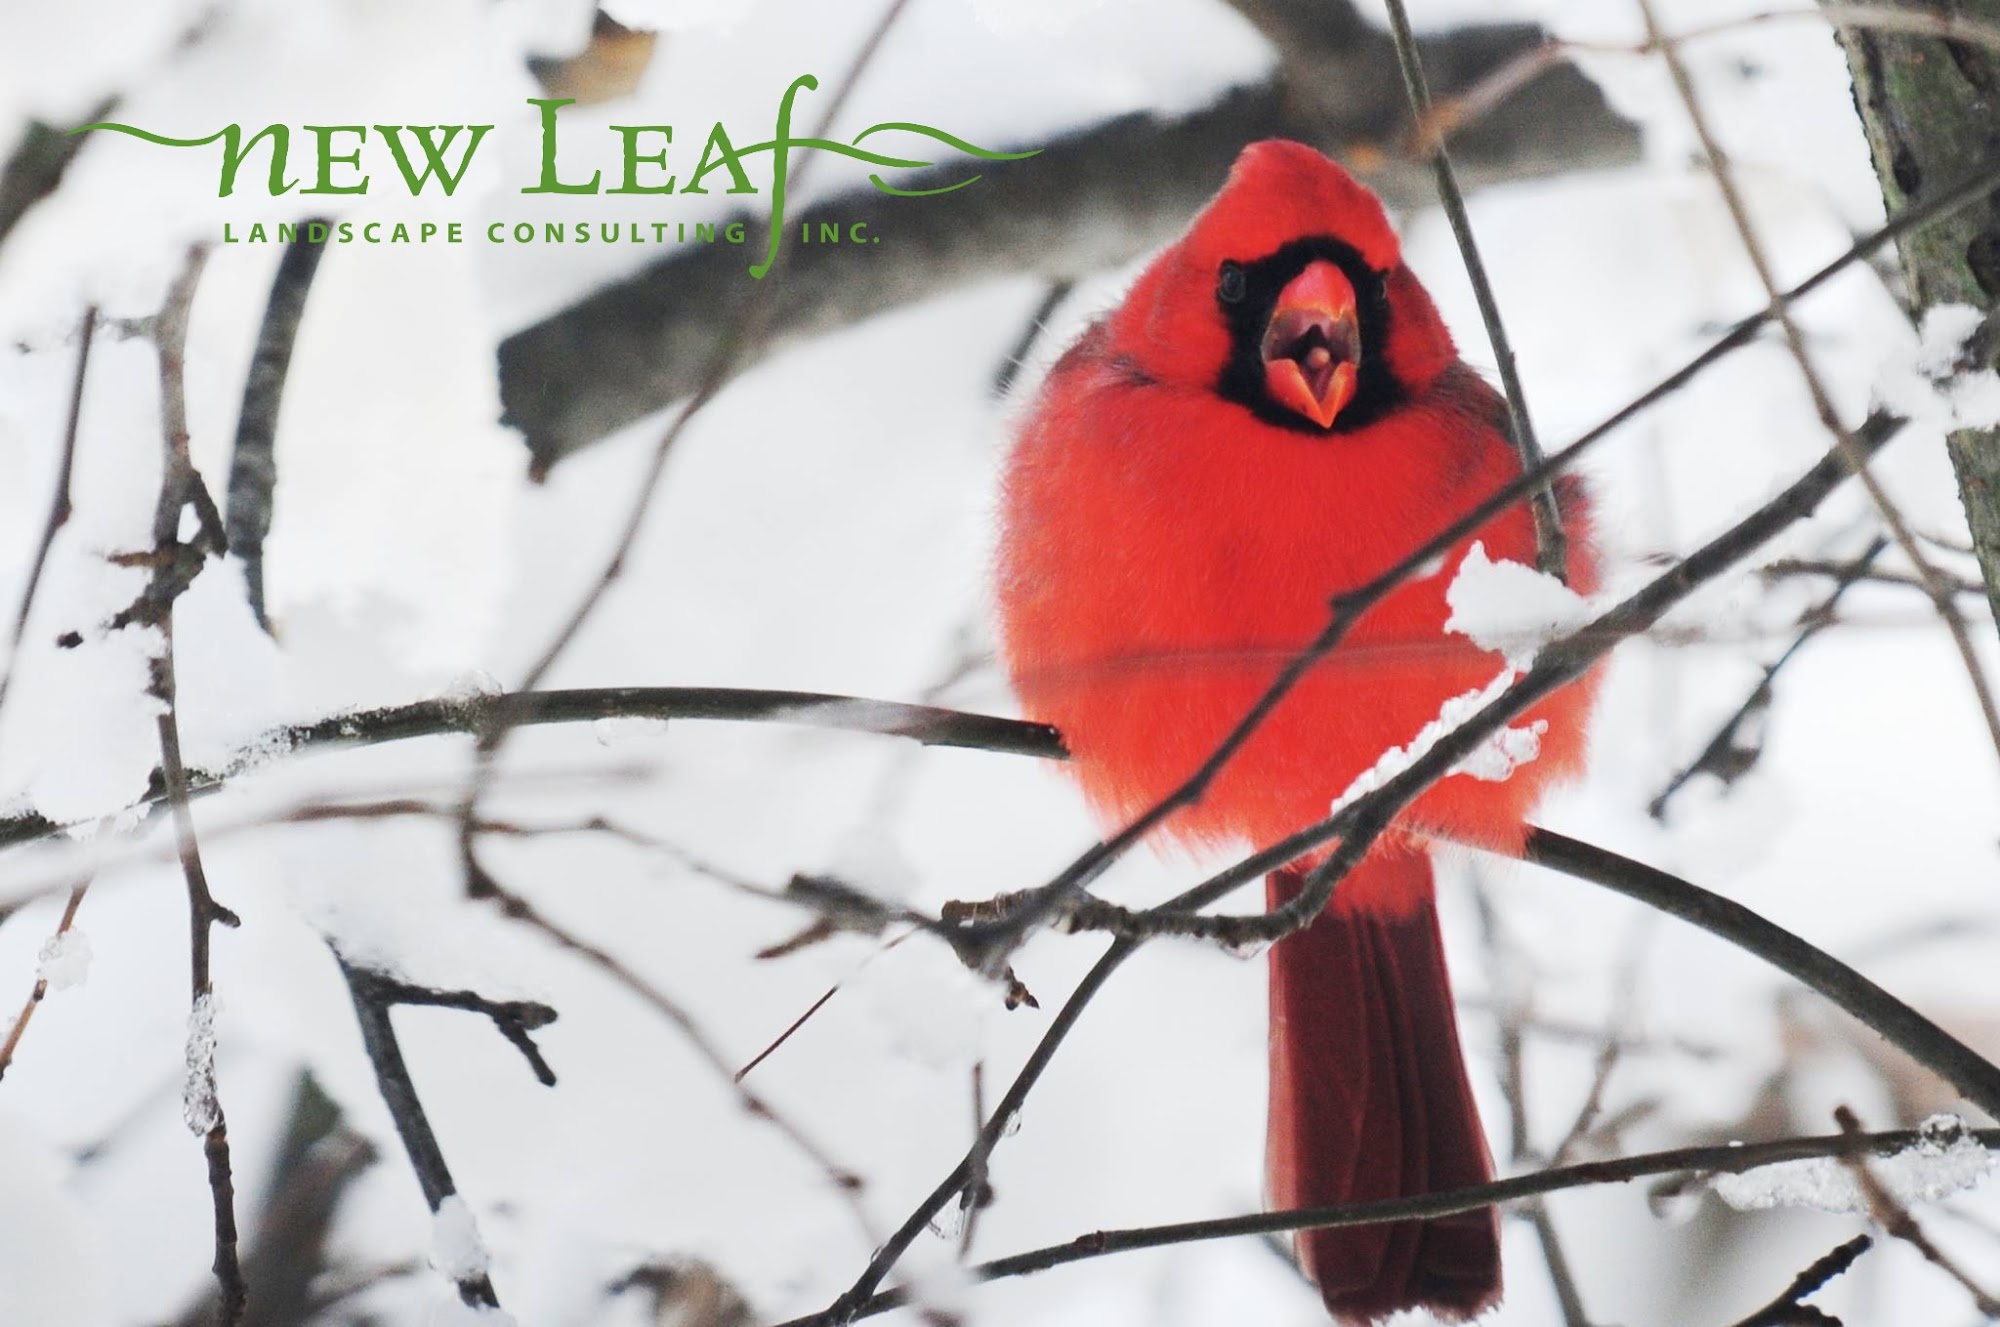 New Leaf Landscape Consulting